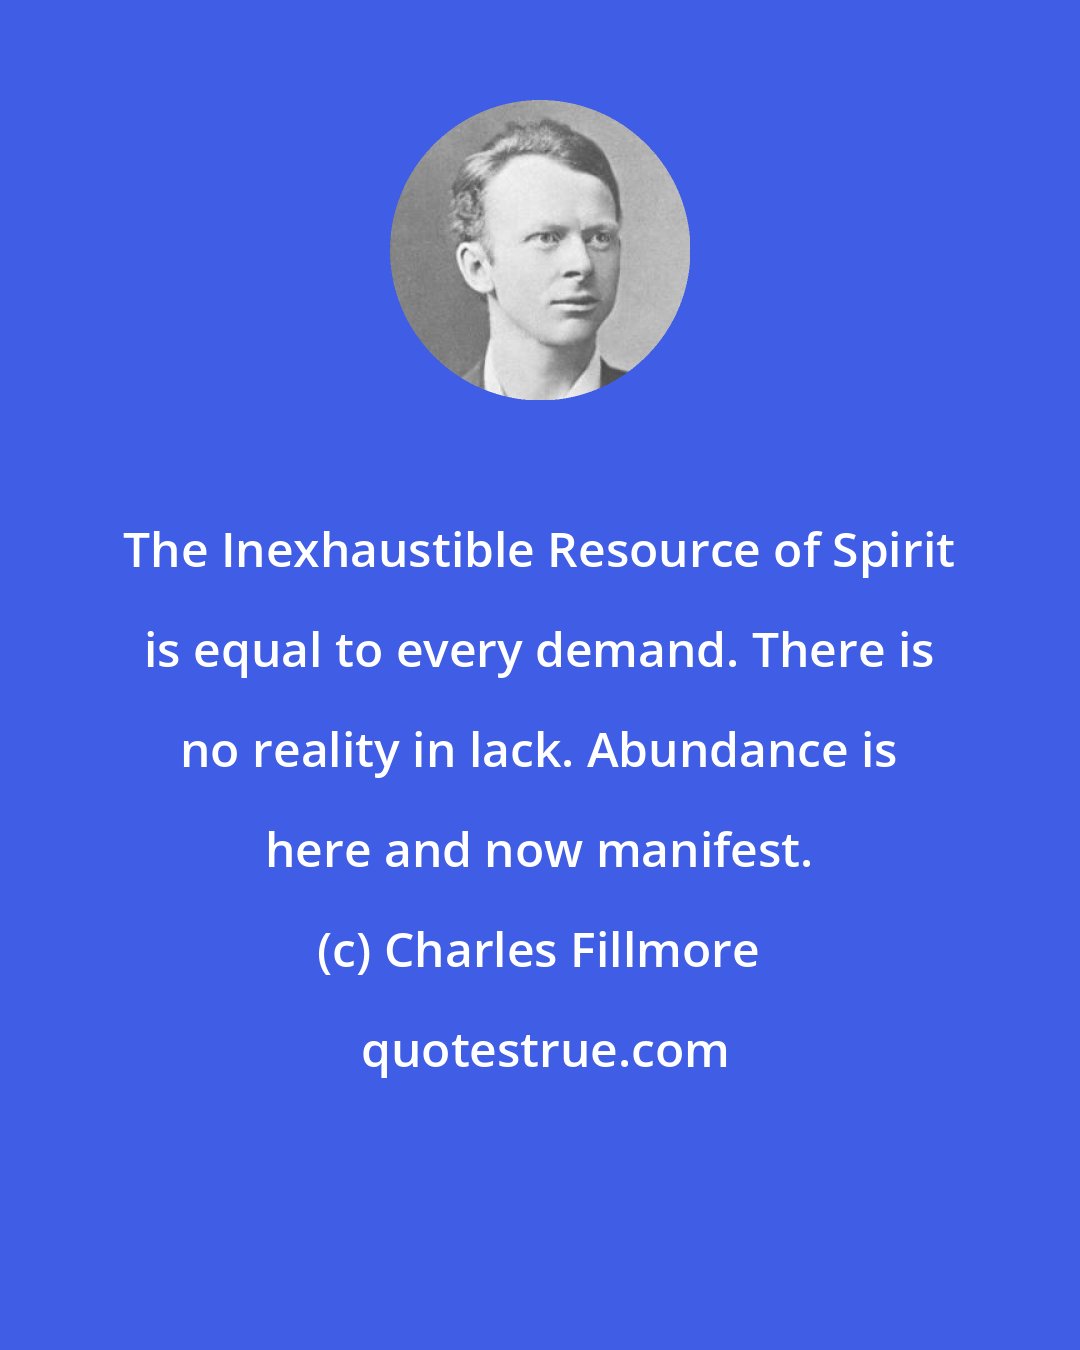 Charles Fillmore: The Inexhaustible Resource of Spirit is equal to every demand. There is no reality in lack. Abundance is here and now manifest.